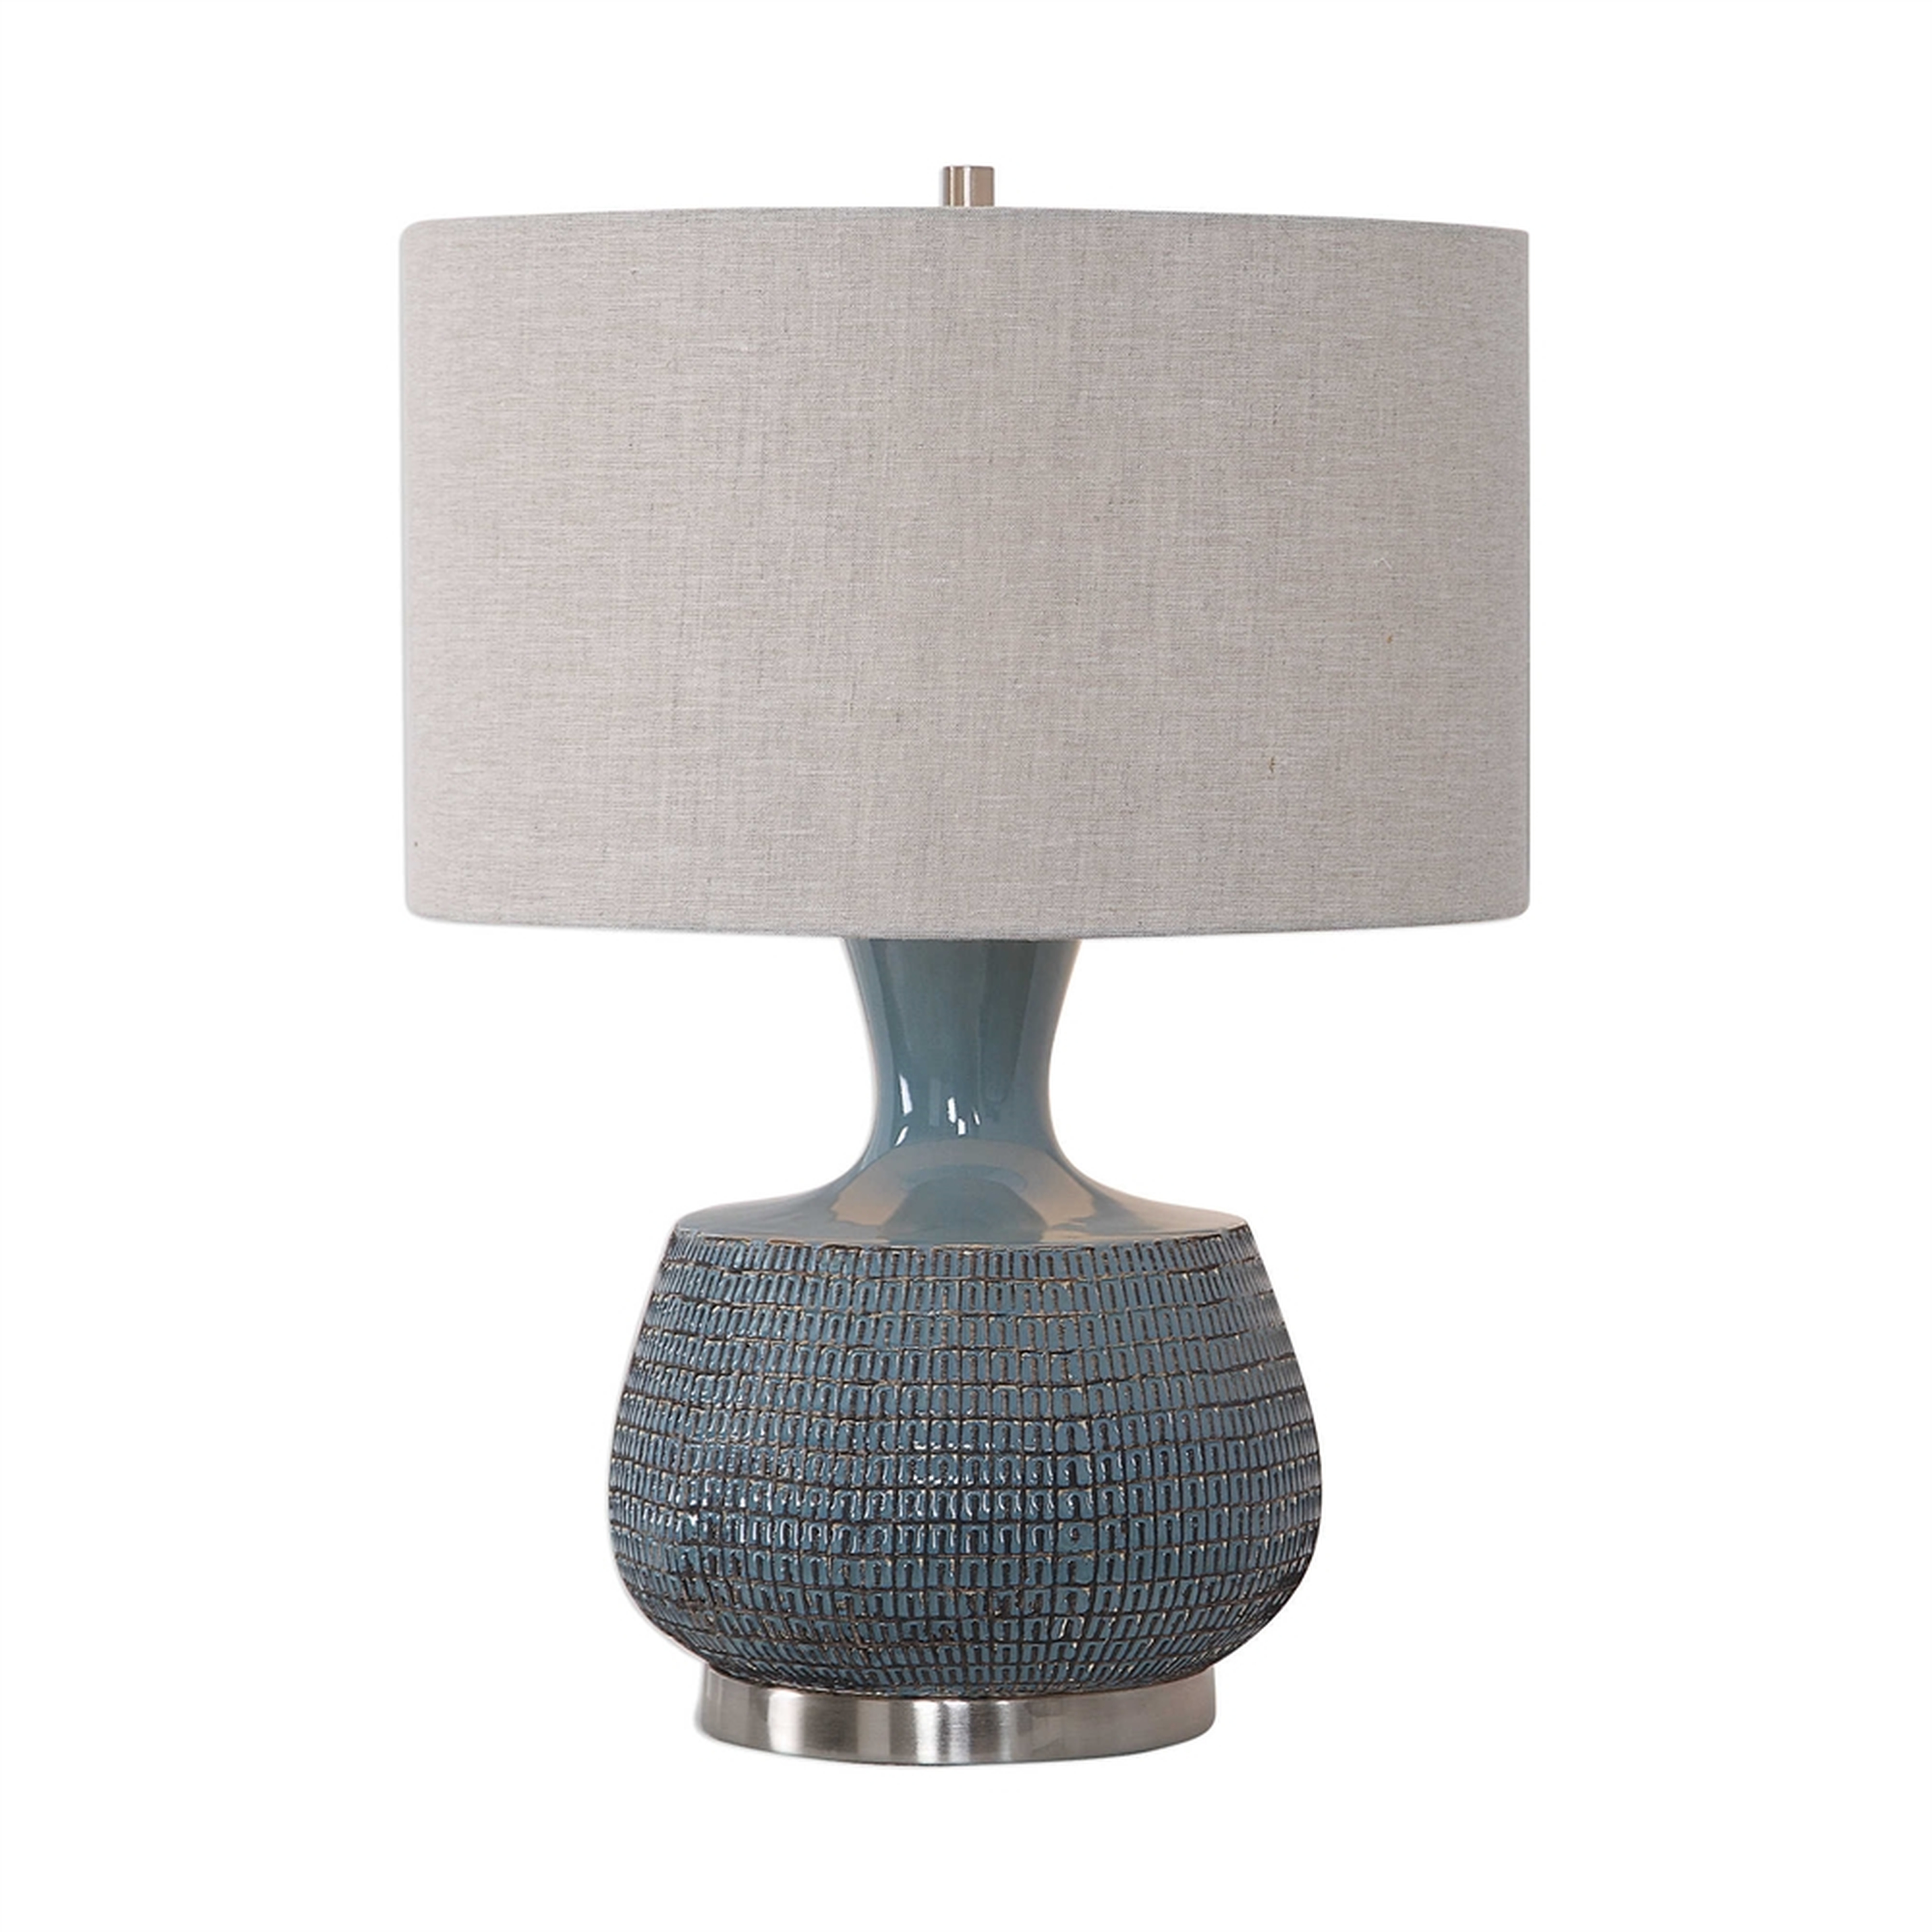 Hearst Table Lamp - Hudsonhill Foundry